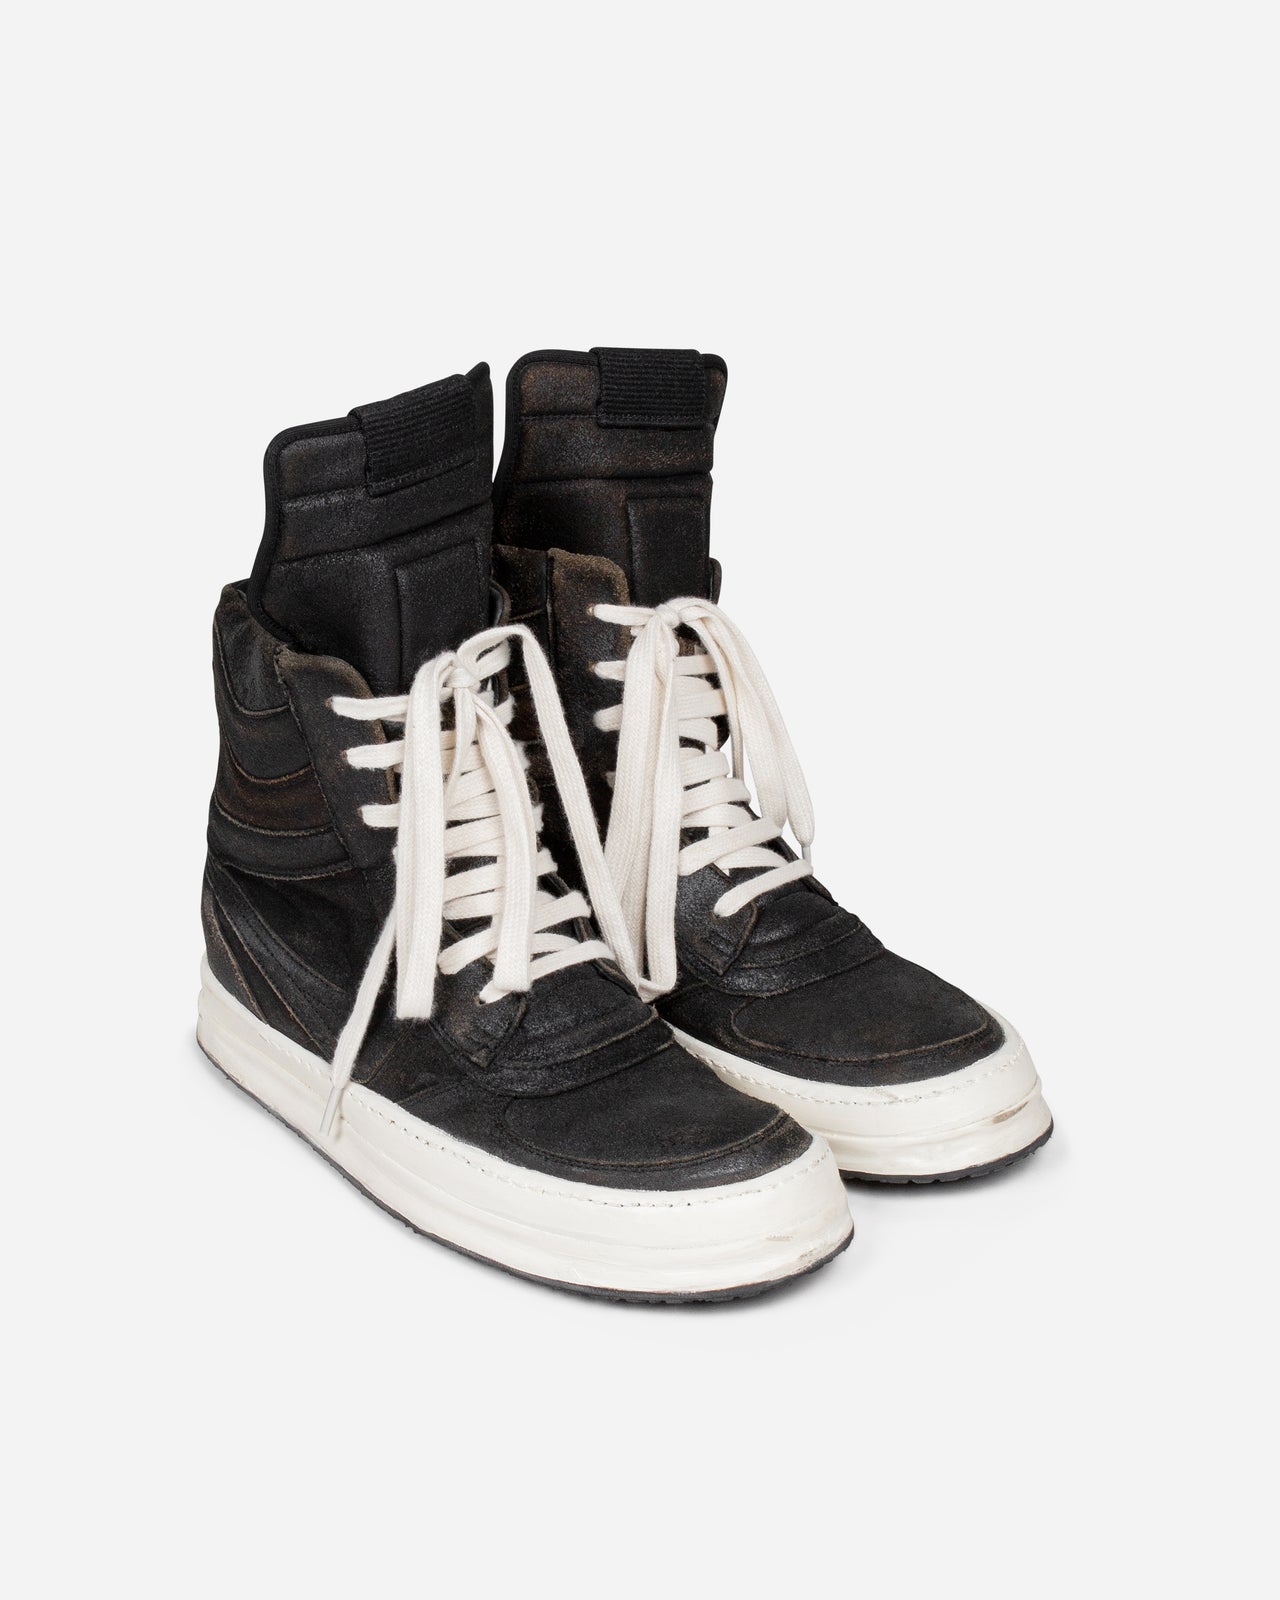 Rick Owens Blistered Lamb Dunk Sneakers - SS08 "Creatch"